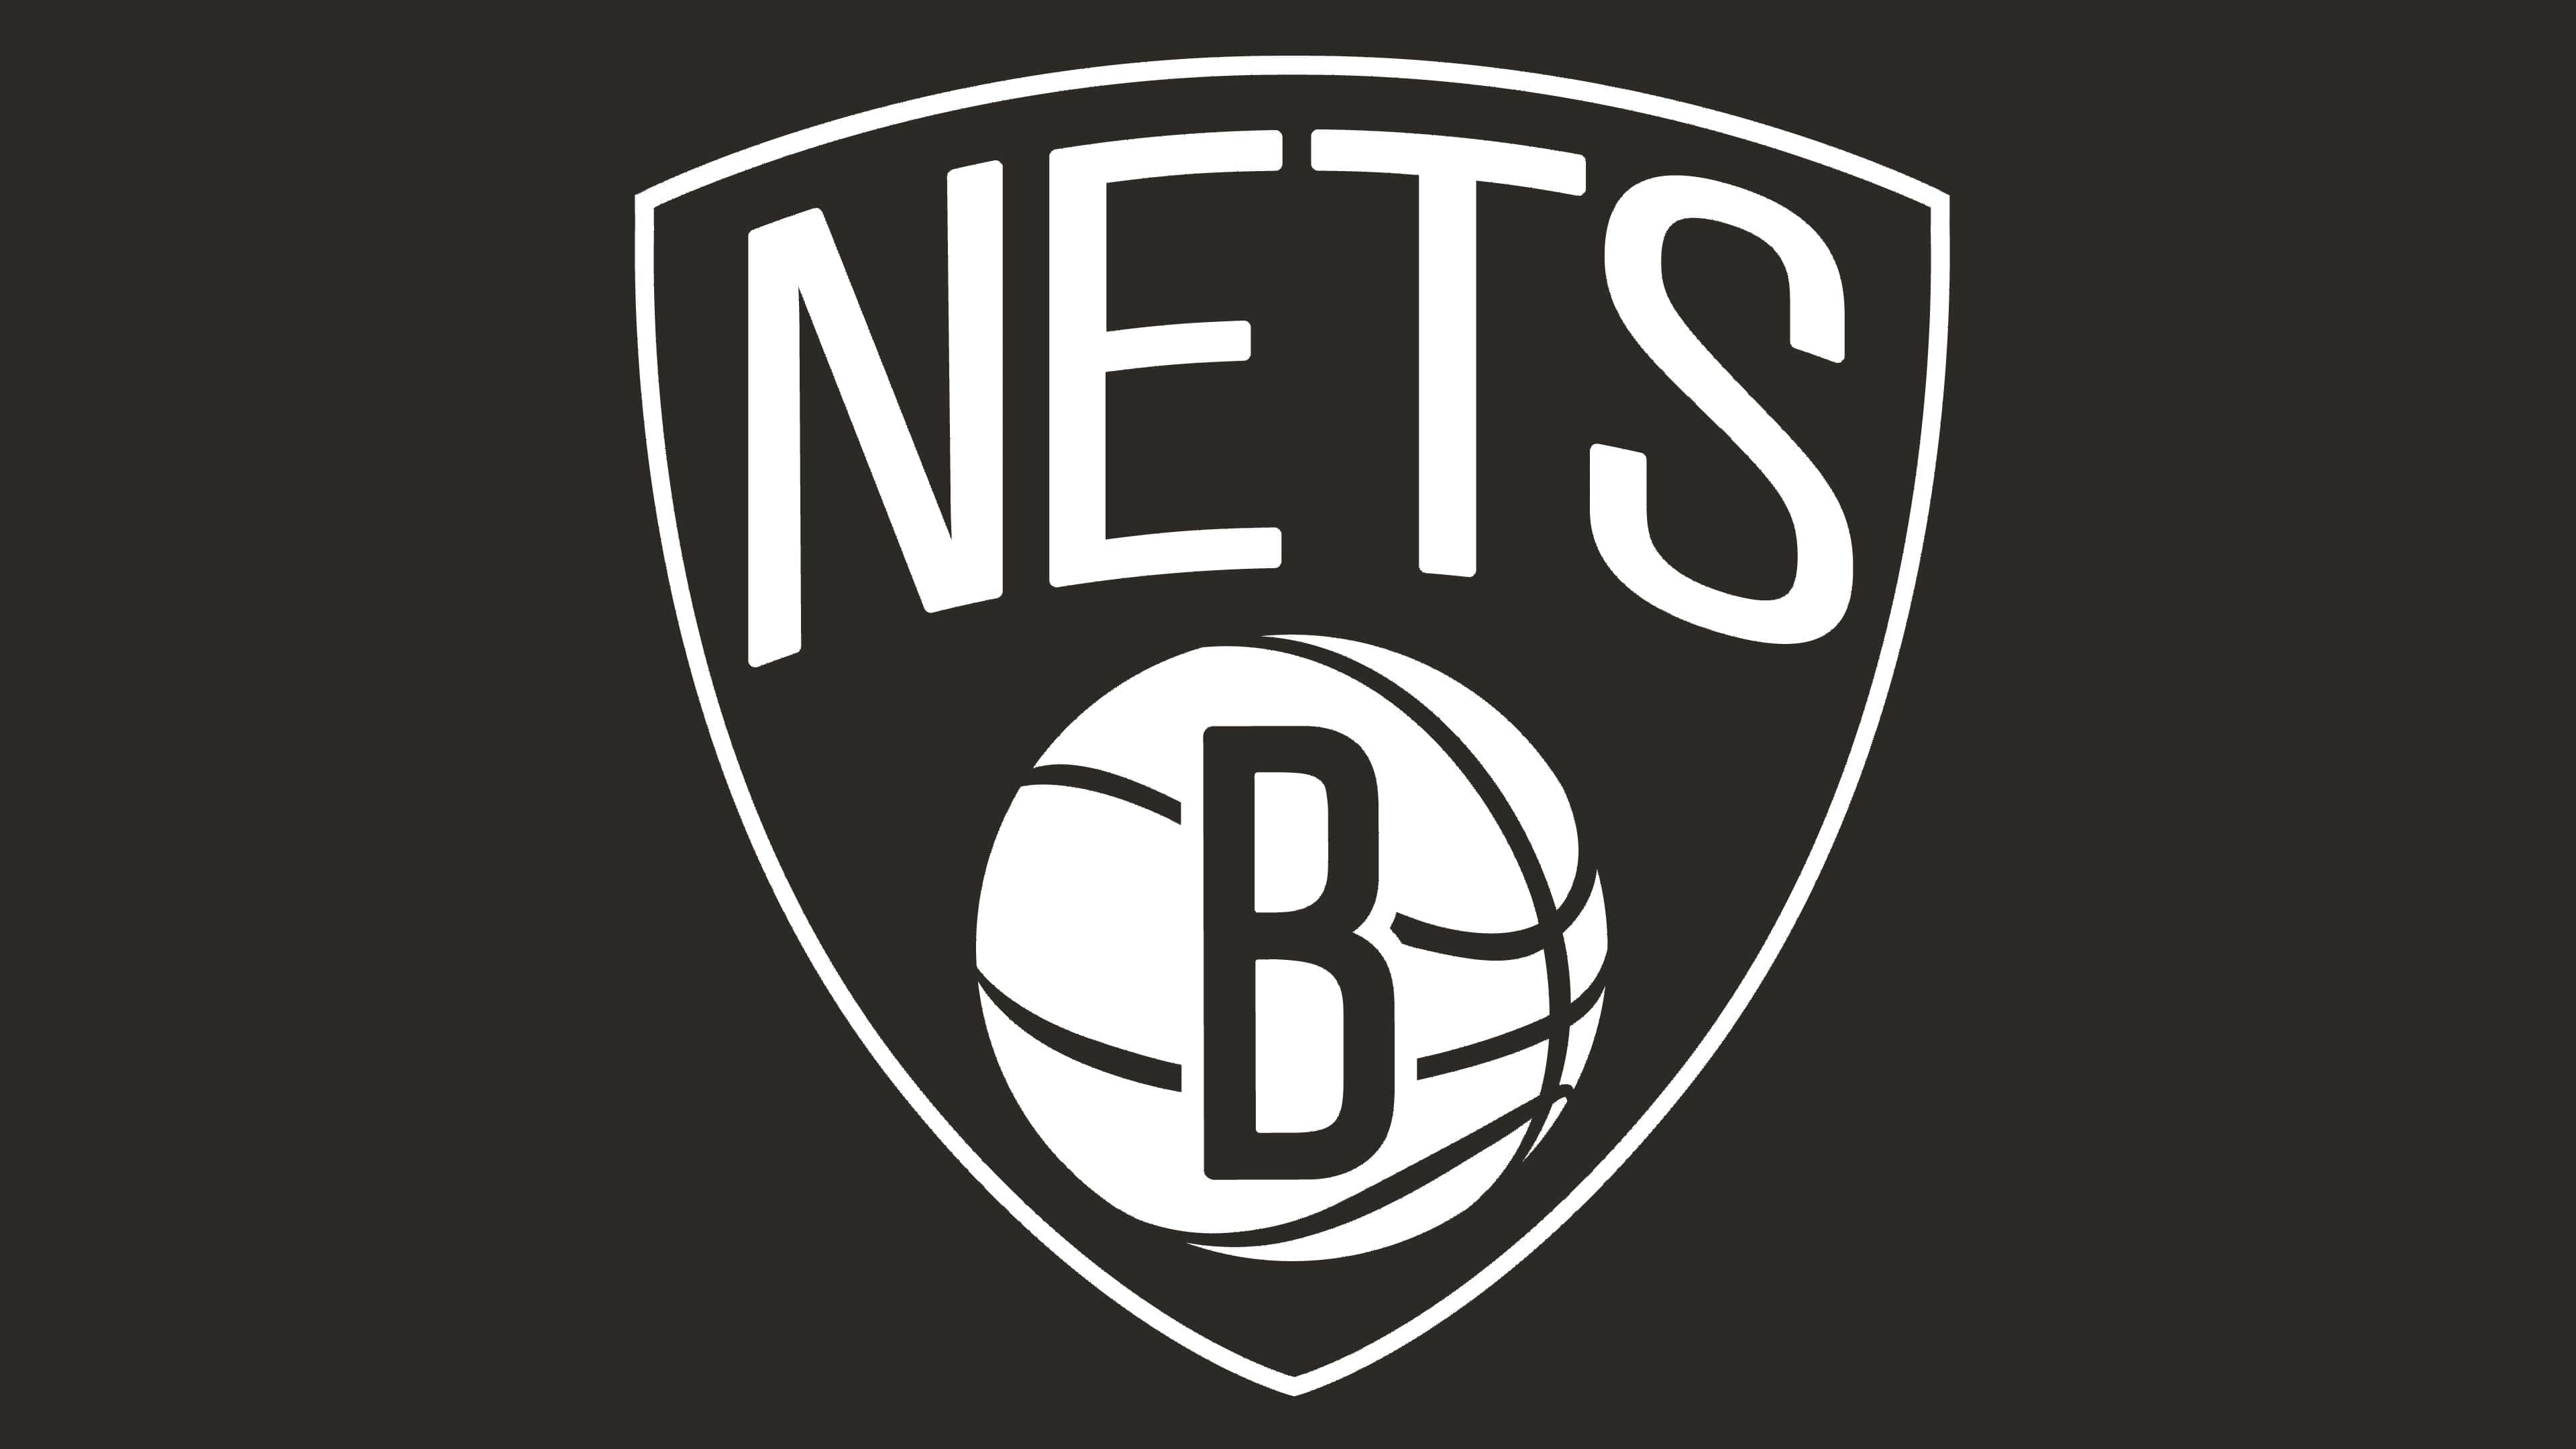 The Nets “Jewish Heritage Night” T-Shirts Have Hebrew Spelling